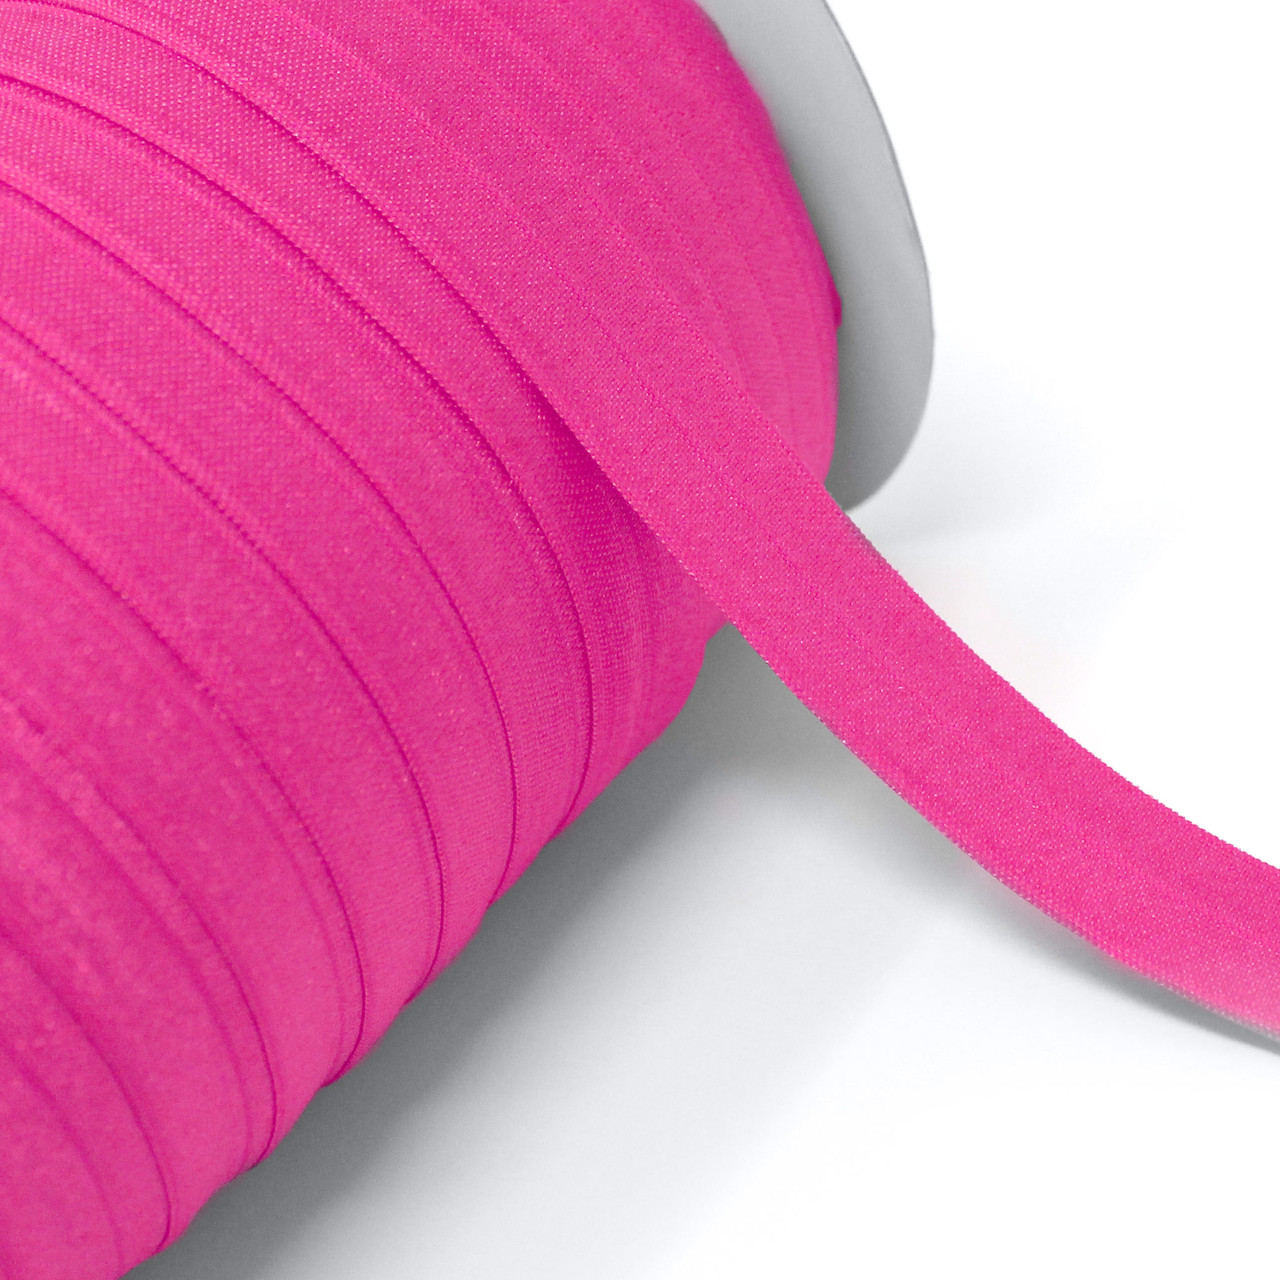 Neon Pink 1 - 25mm Fold Over Elastic - Elastic by the Yard